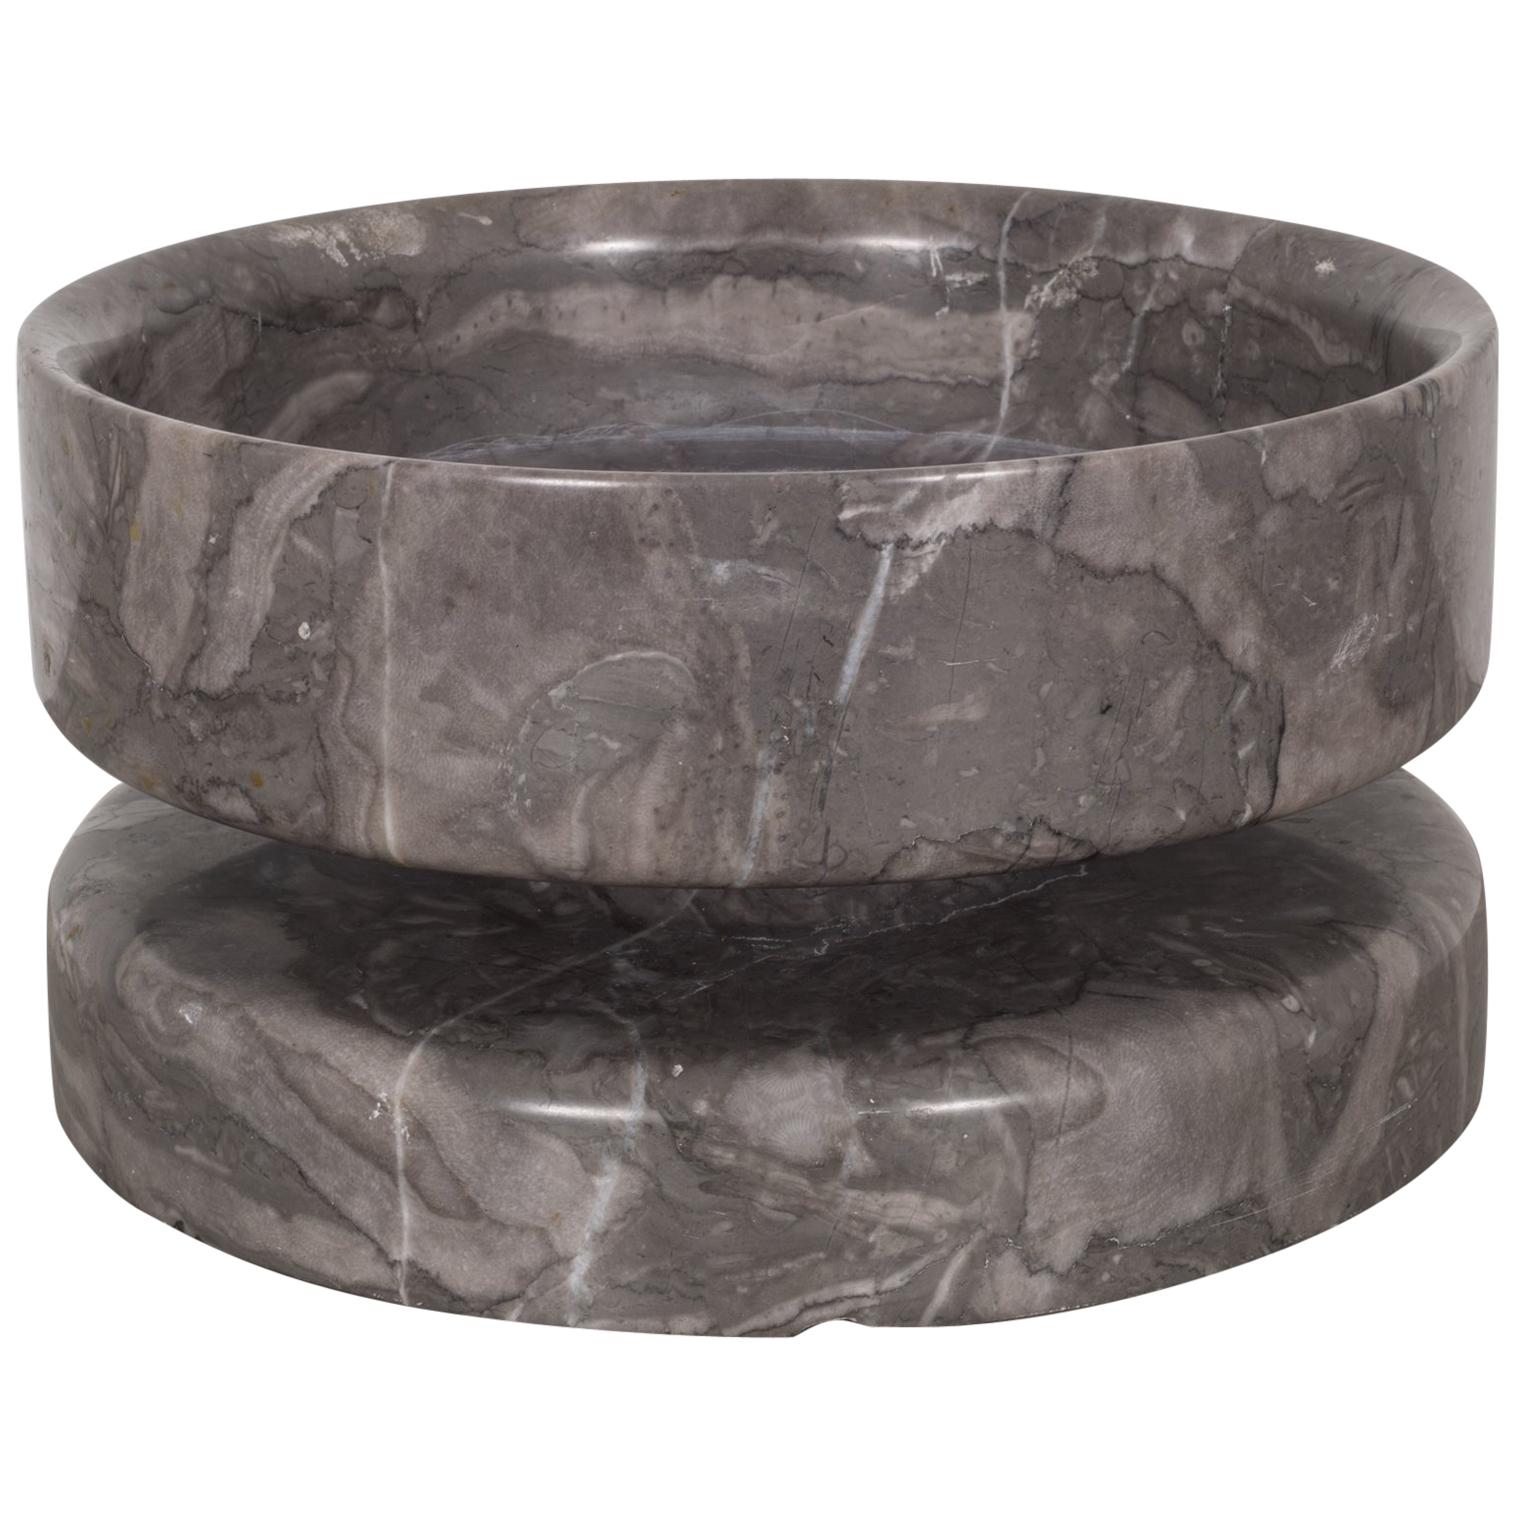 About

This is an original grey marble bowl by Angelo Mangiarotti for Knoll International. This bowl is reversible with a 2.25